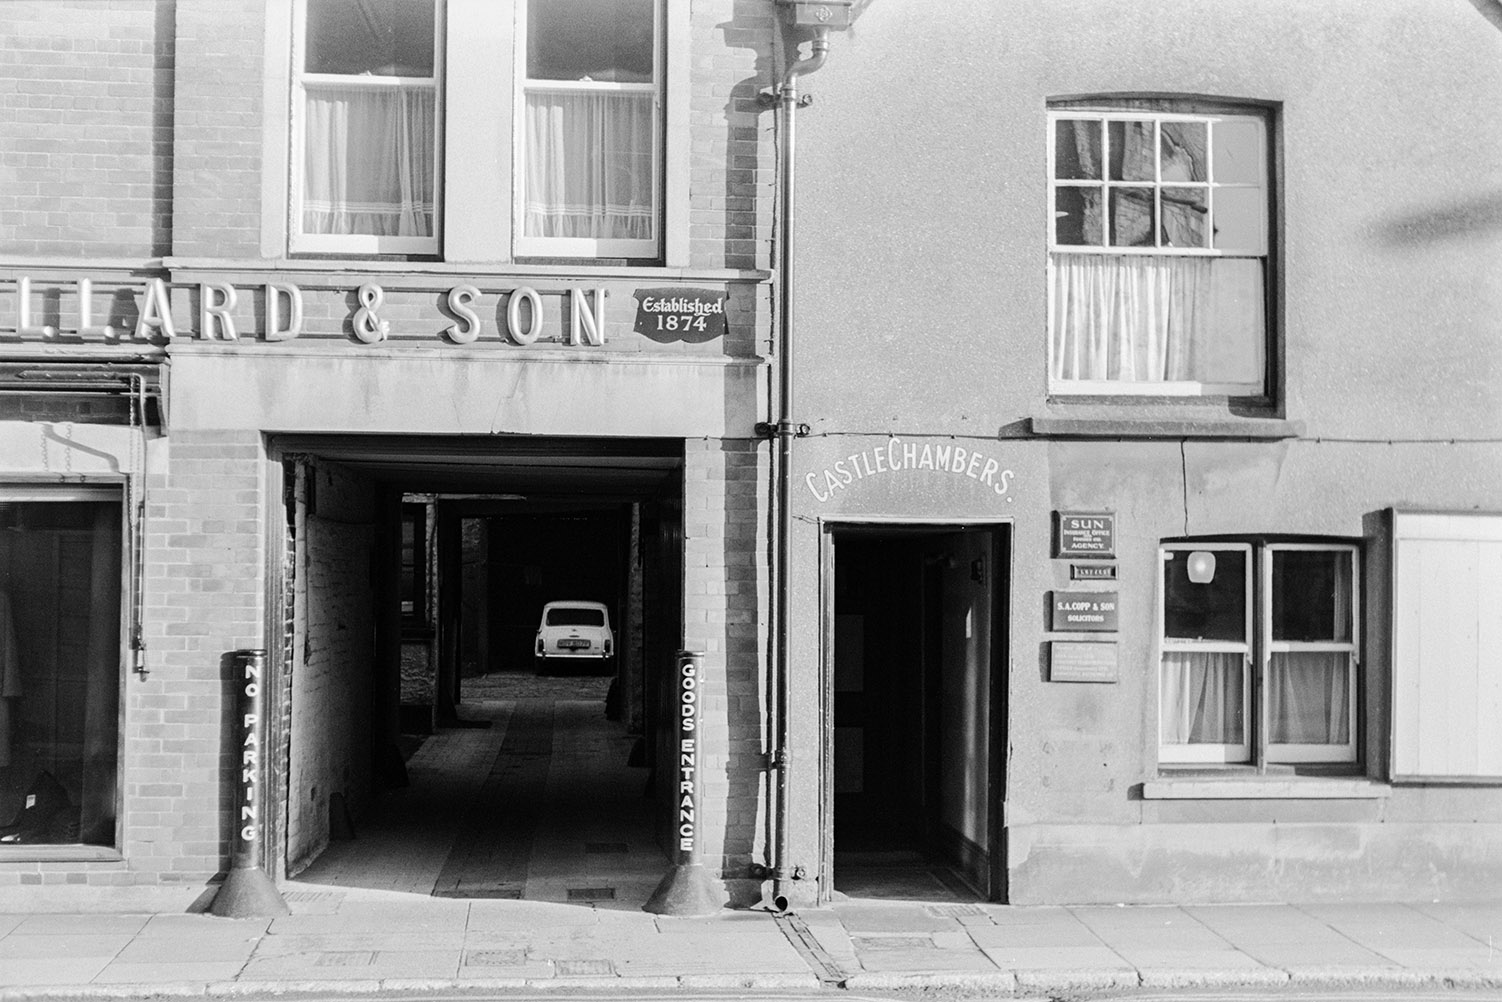 The front of Castle Chambers Solicitor office in Barnstaple. It is next to the coaching entrance of a pub. The building is now listed.